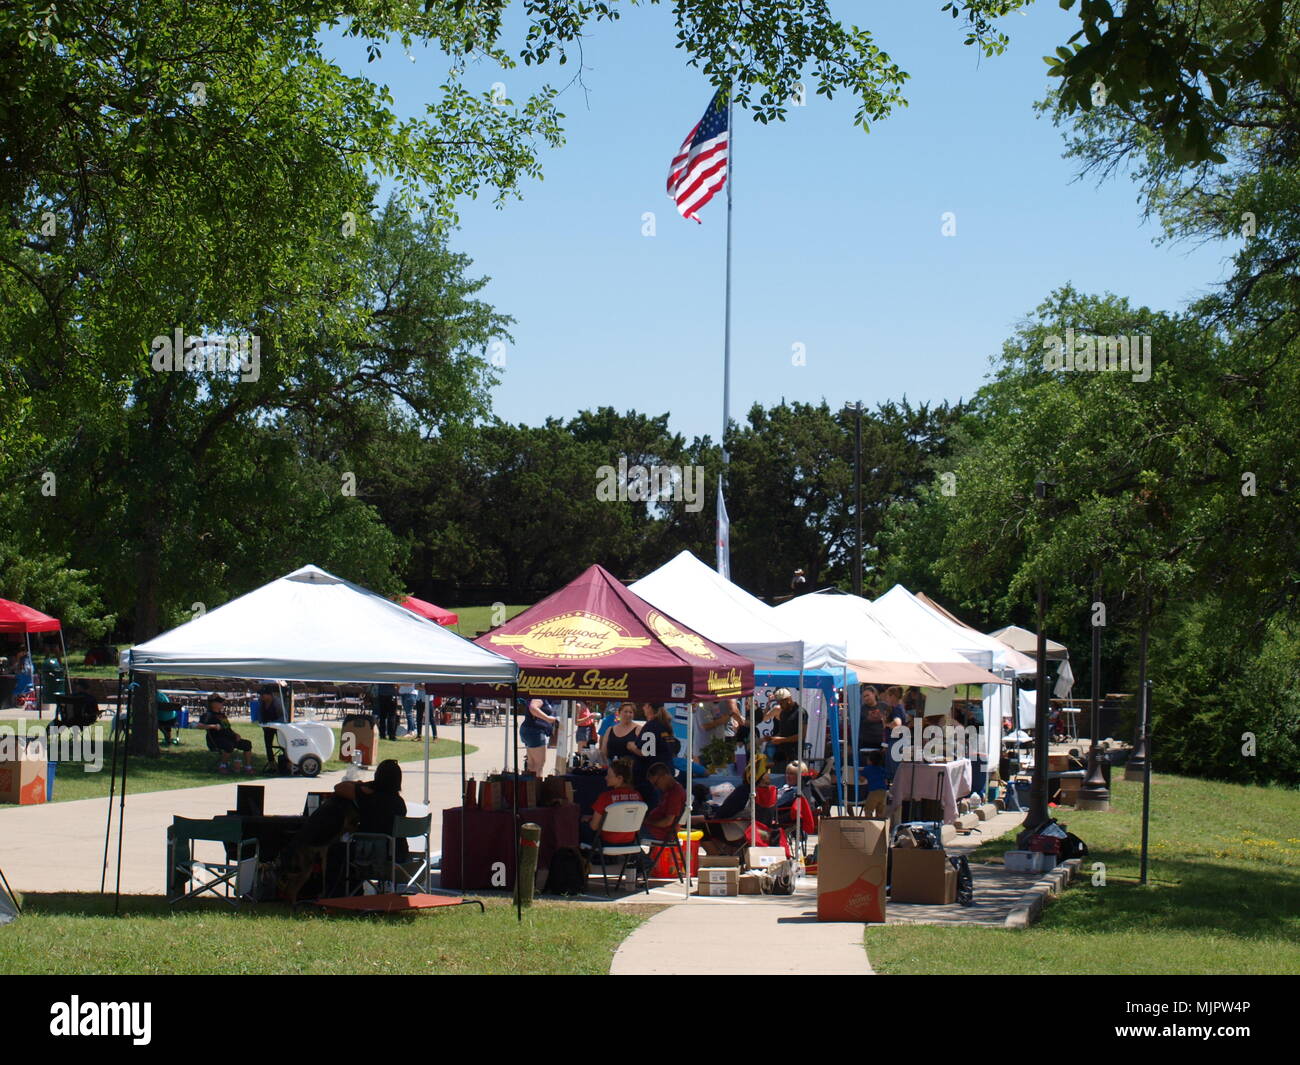 Dallas,USA,05 May 2018. The first annual Dog Dayz of Dallas had a highly successful turn out at Flag Pole Hill in the Lake Highlands District. There were vendors from across the metroplex including adoptions and even pets trained by inmates under a program of the Dallas County Sheriff. Feed, Vets and sundry items were available to purchase. The show was bills as a family and pet friendly festival.Credit:dallaspaparazzo/Alamy Live News Stock Photo